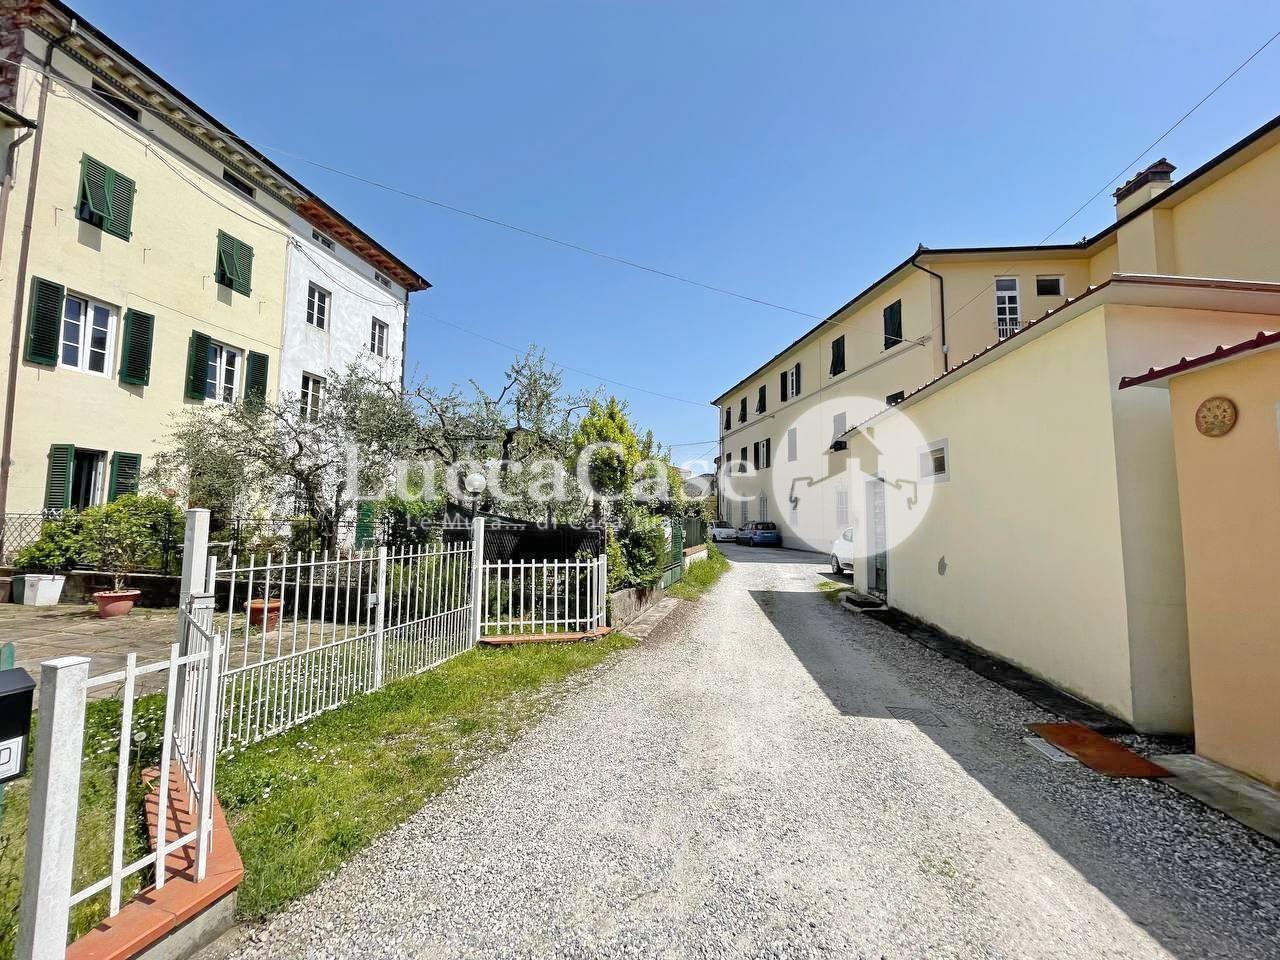 Townhouses for sale, ref. E076P